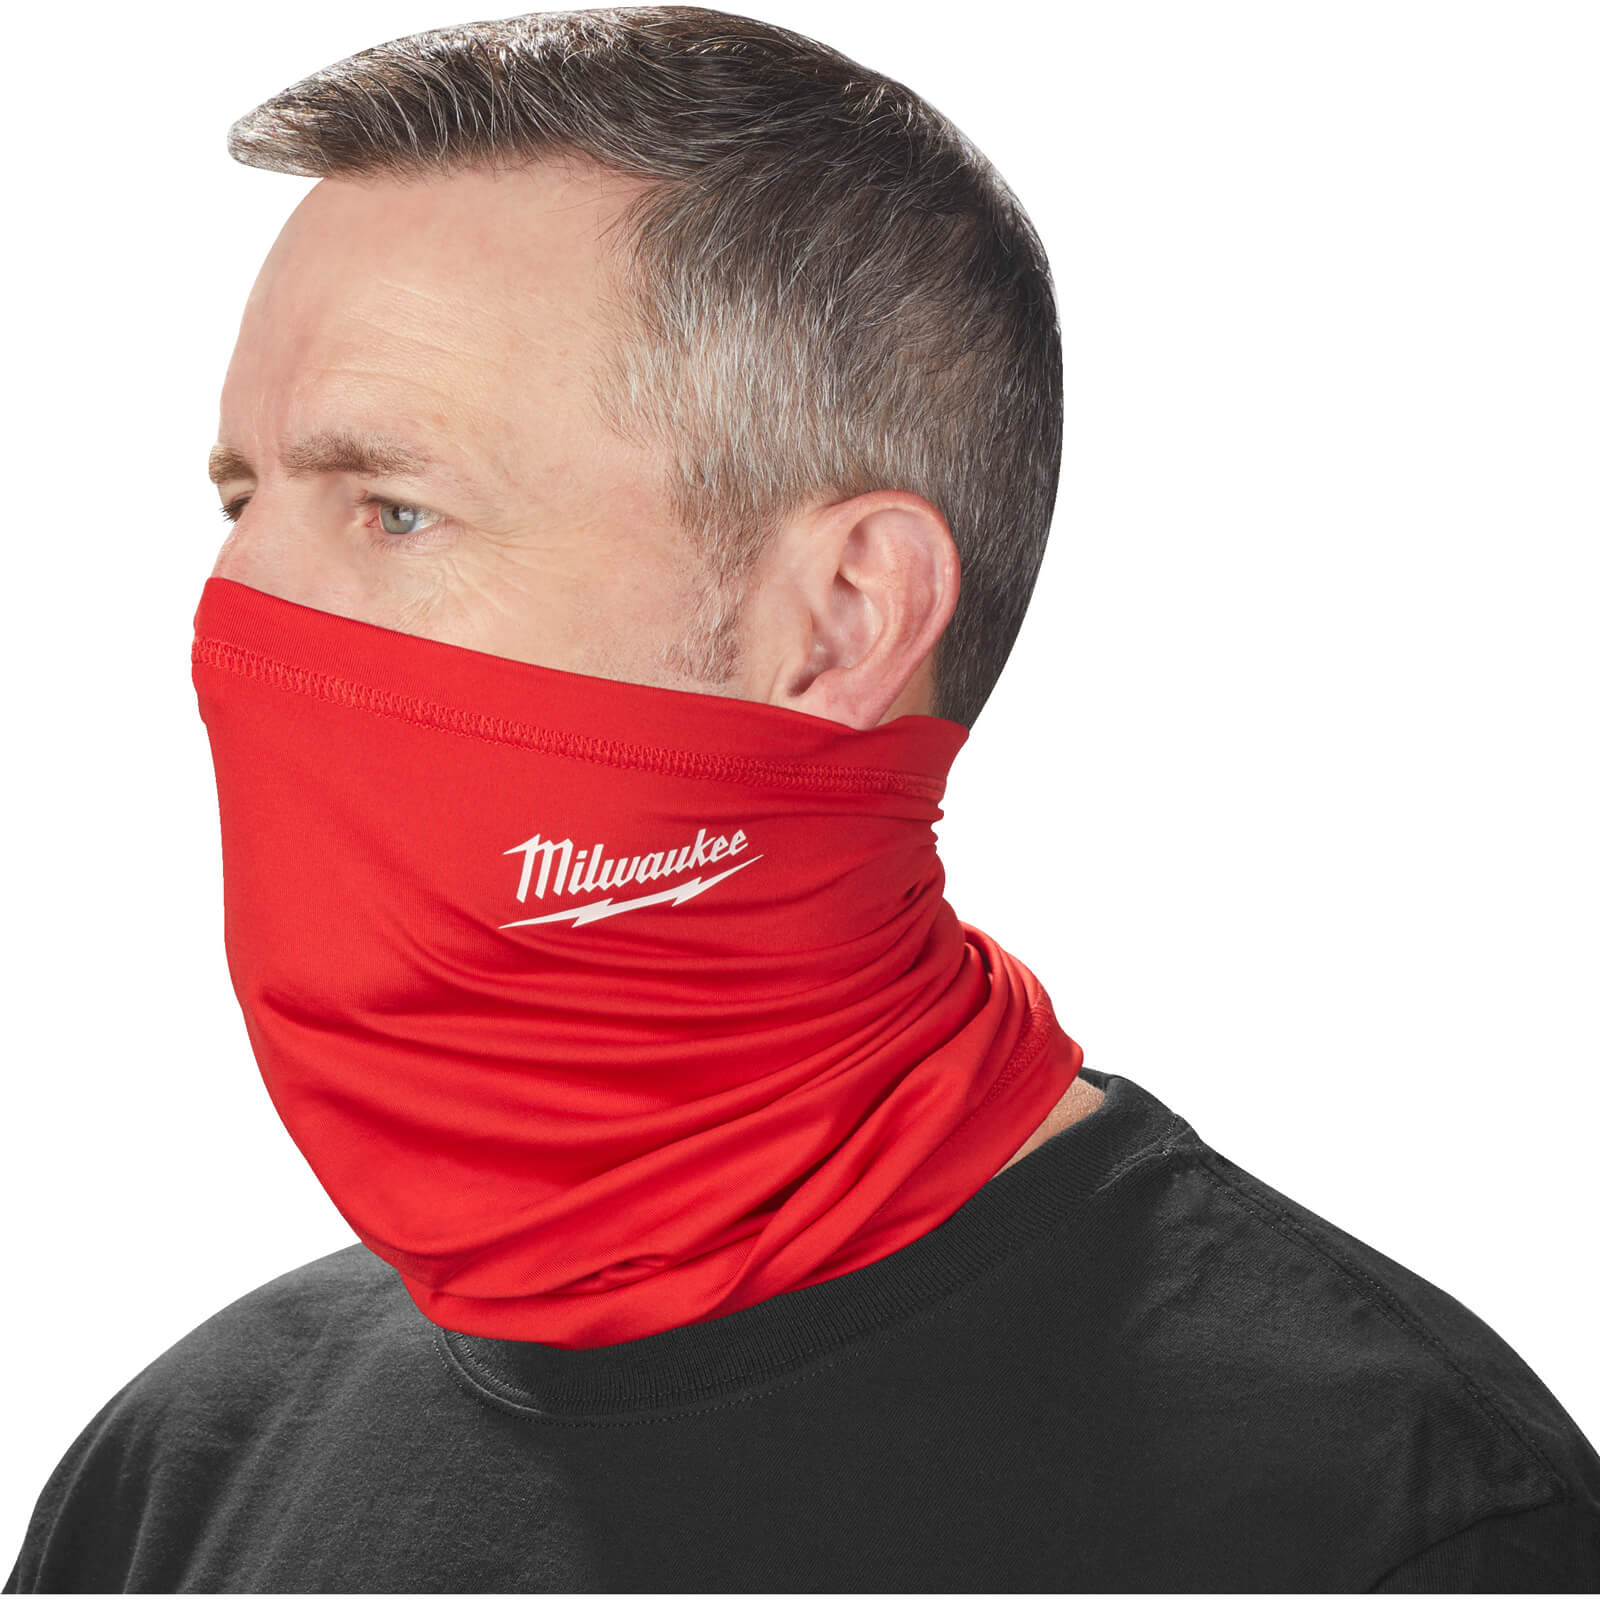 Image of Milwaukee NGFM Snood Neck Gaiter Warmer Red One Size